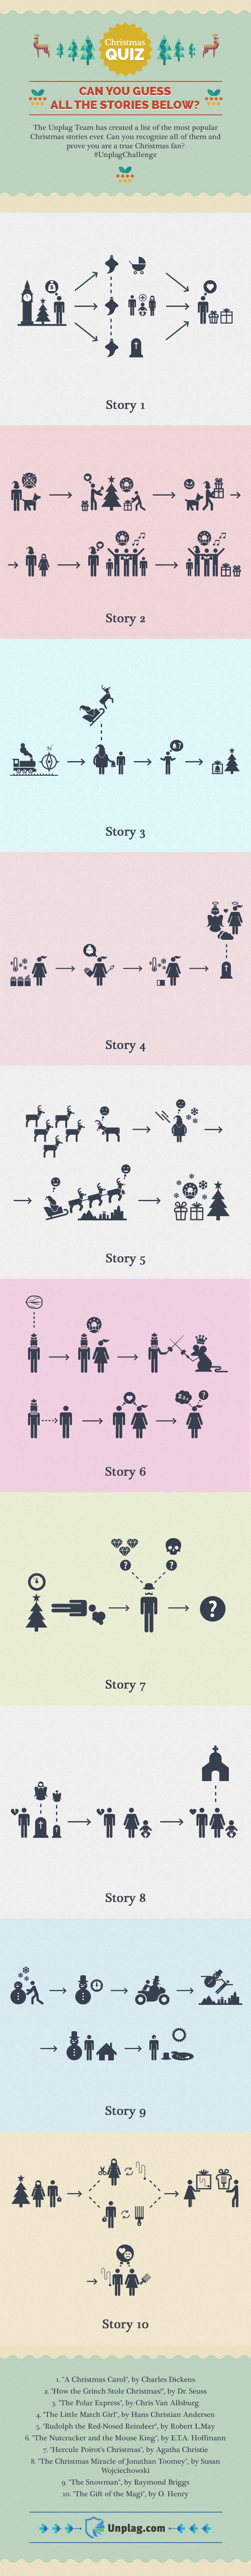 Christmas Quiz: 10 Most Popular Stories infographic